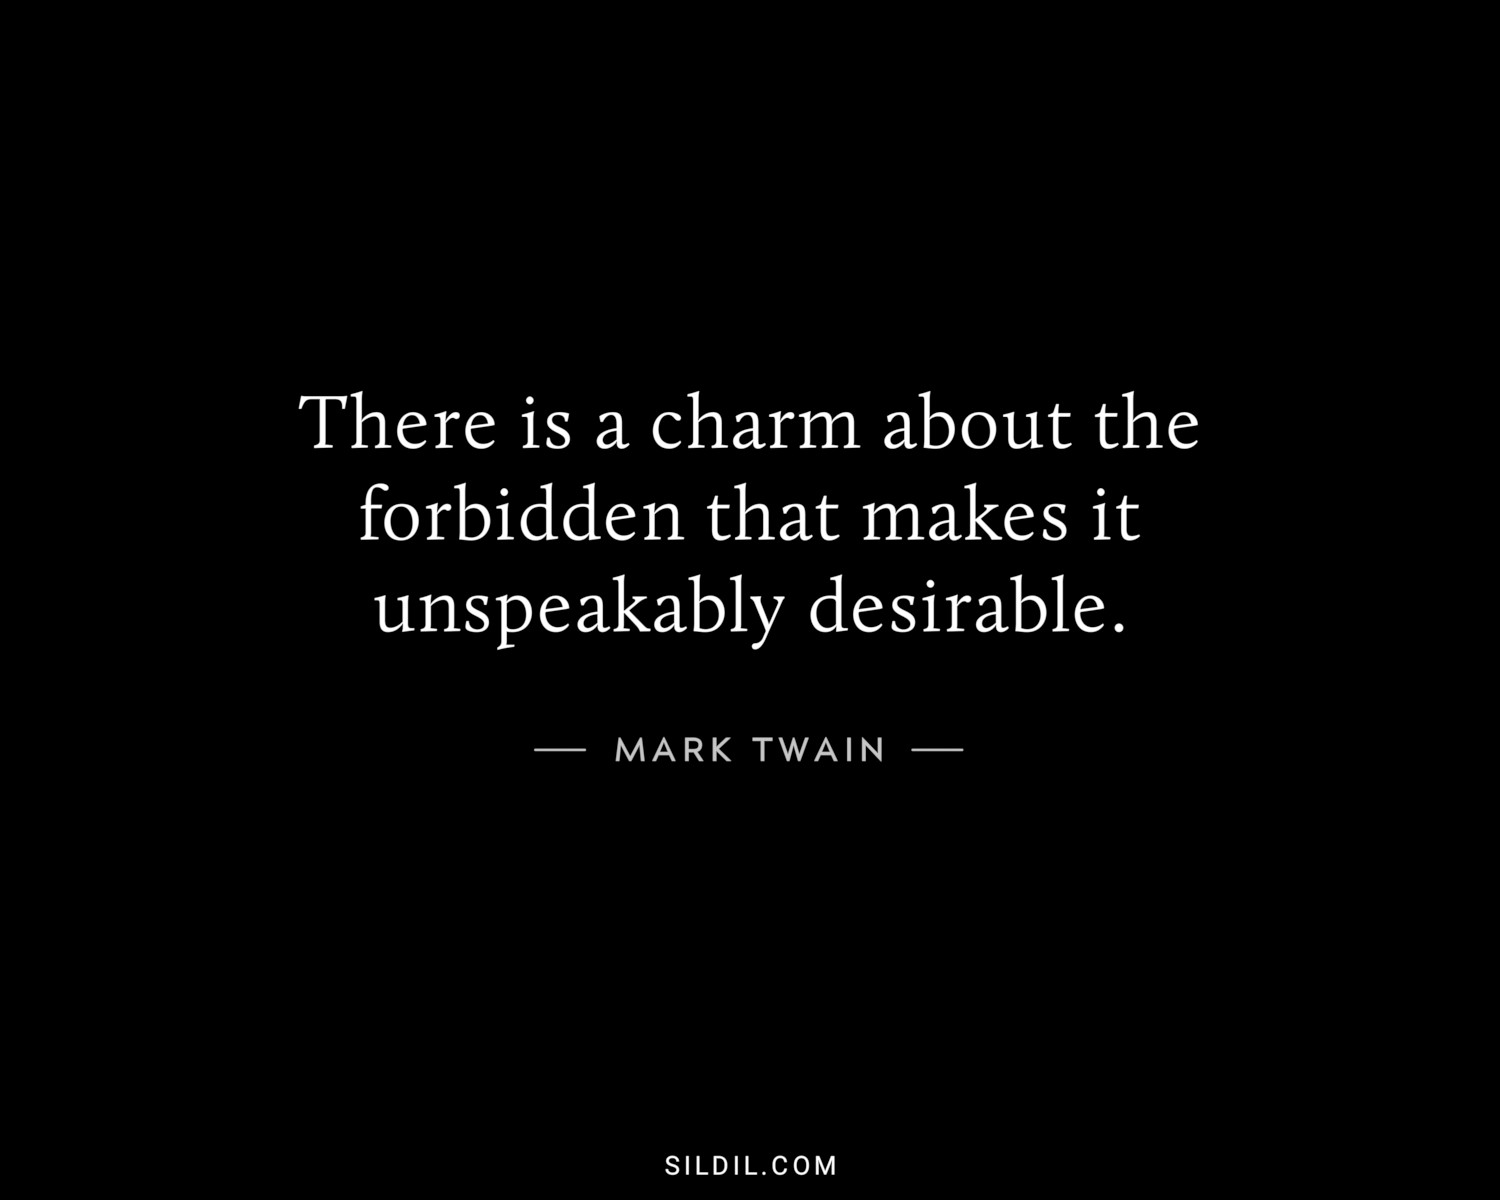 There is a charm about the forbidden that makes it unspeakably desirable.